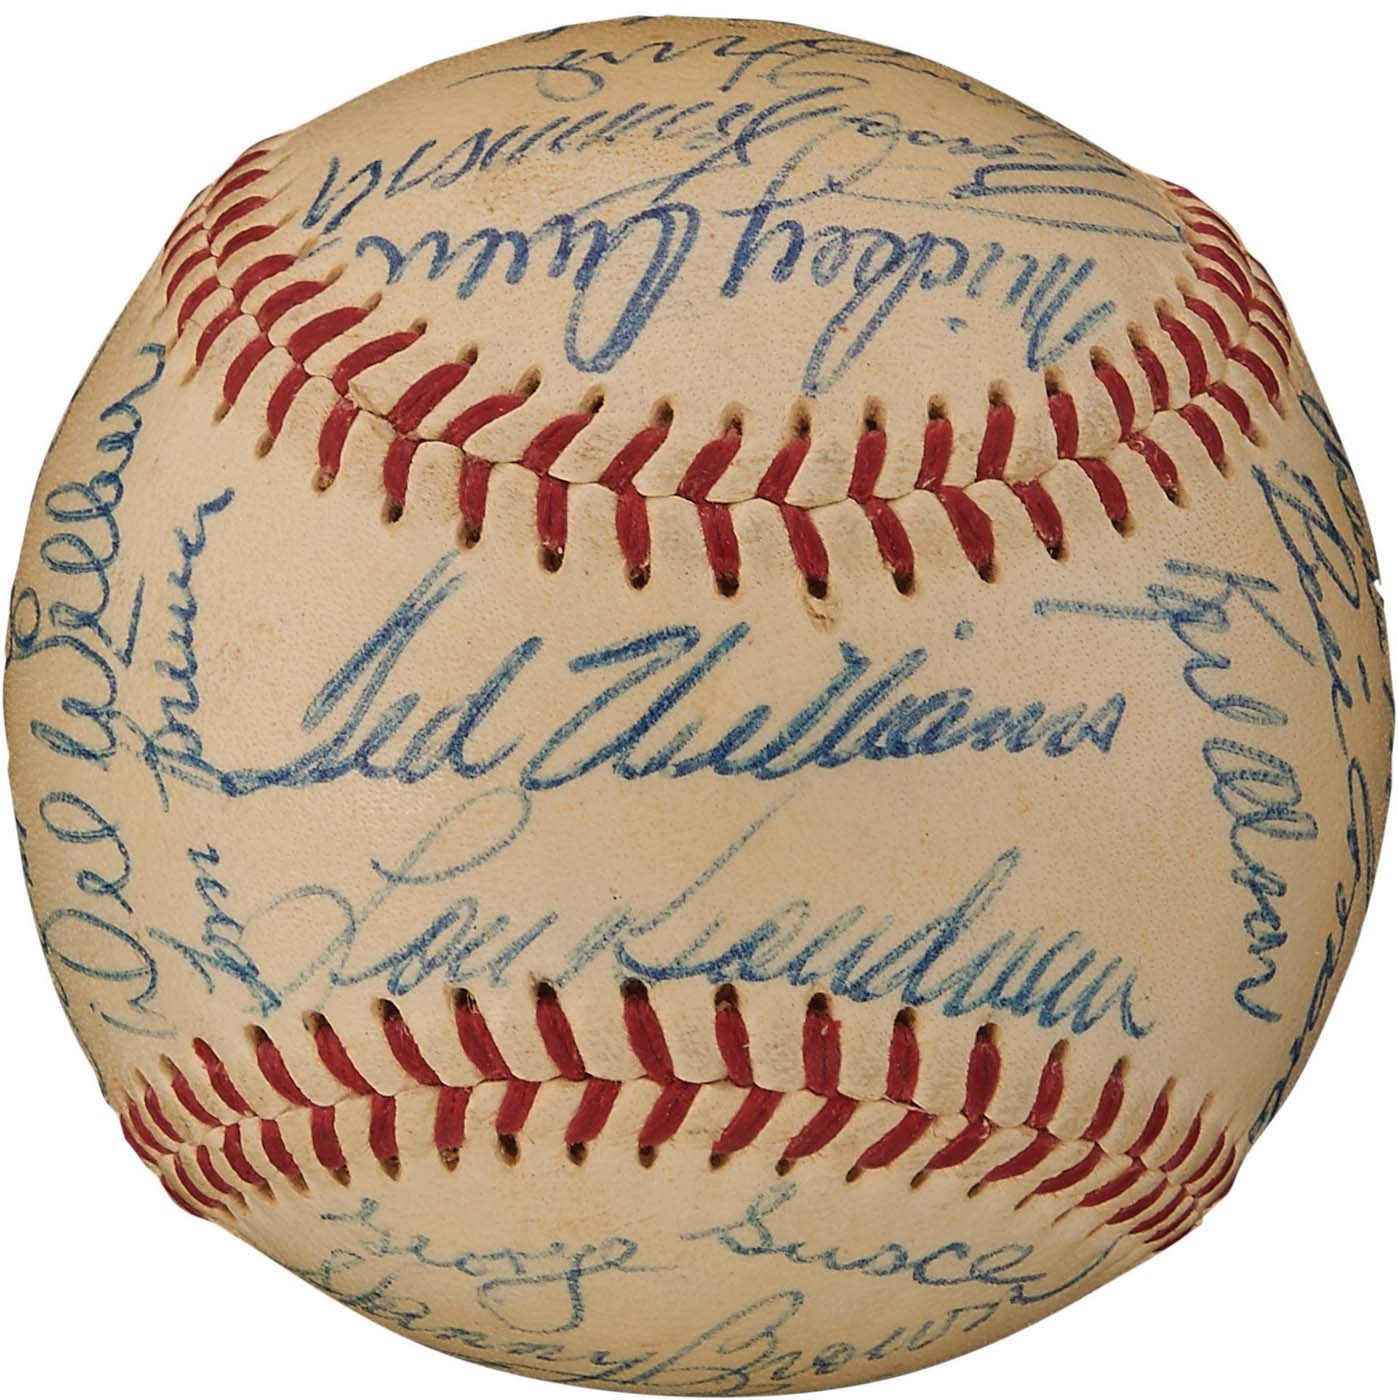 Boston Sports - 1954 Boston Red Sox Team-Signed Baseball with Harry Agganis (PSA NM+ 7.5)